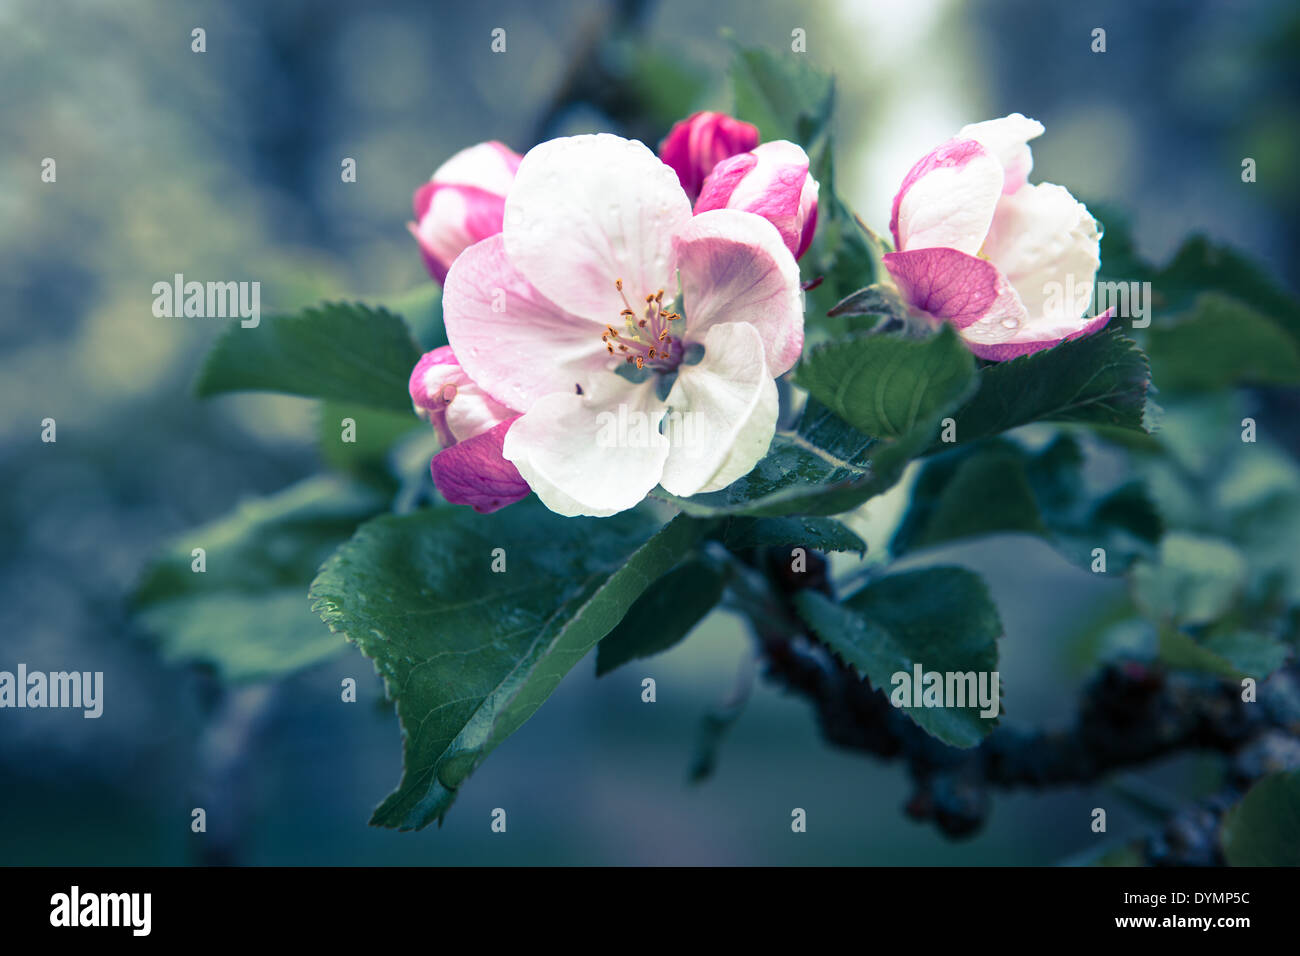 Apple blossom with morning dew Stock Photo